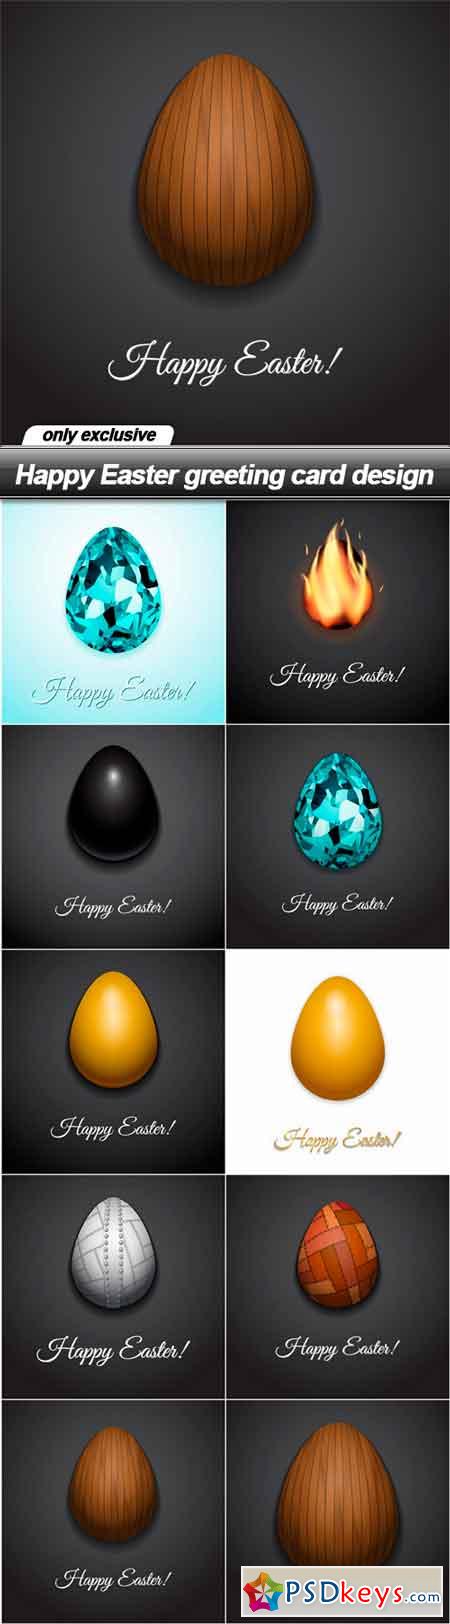 Happy Easter greeting card design - 10 EPS